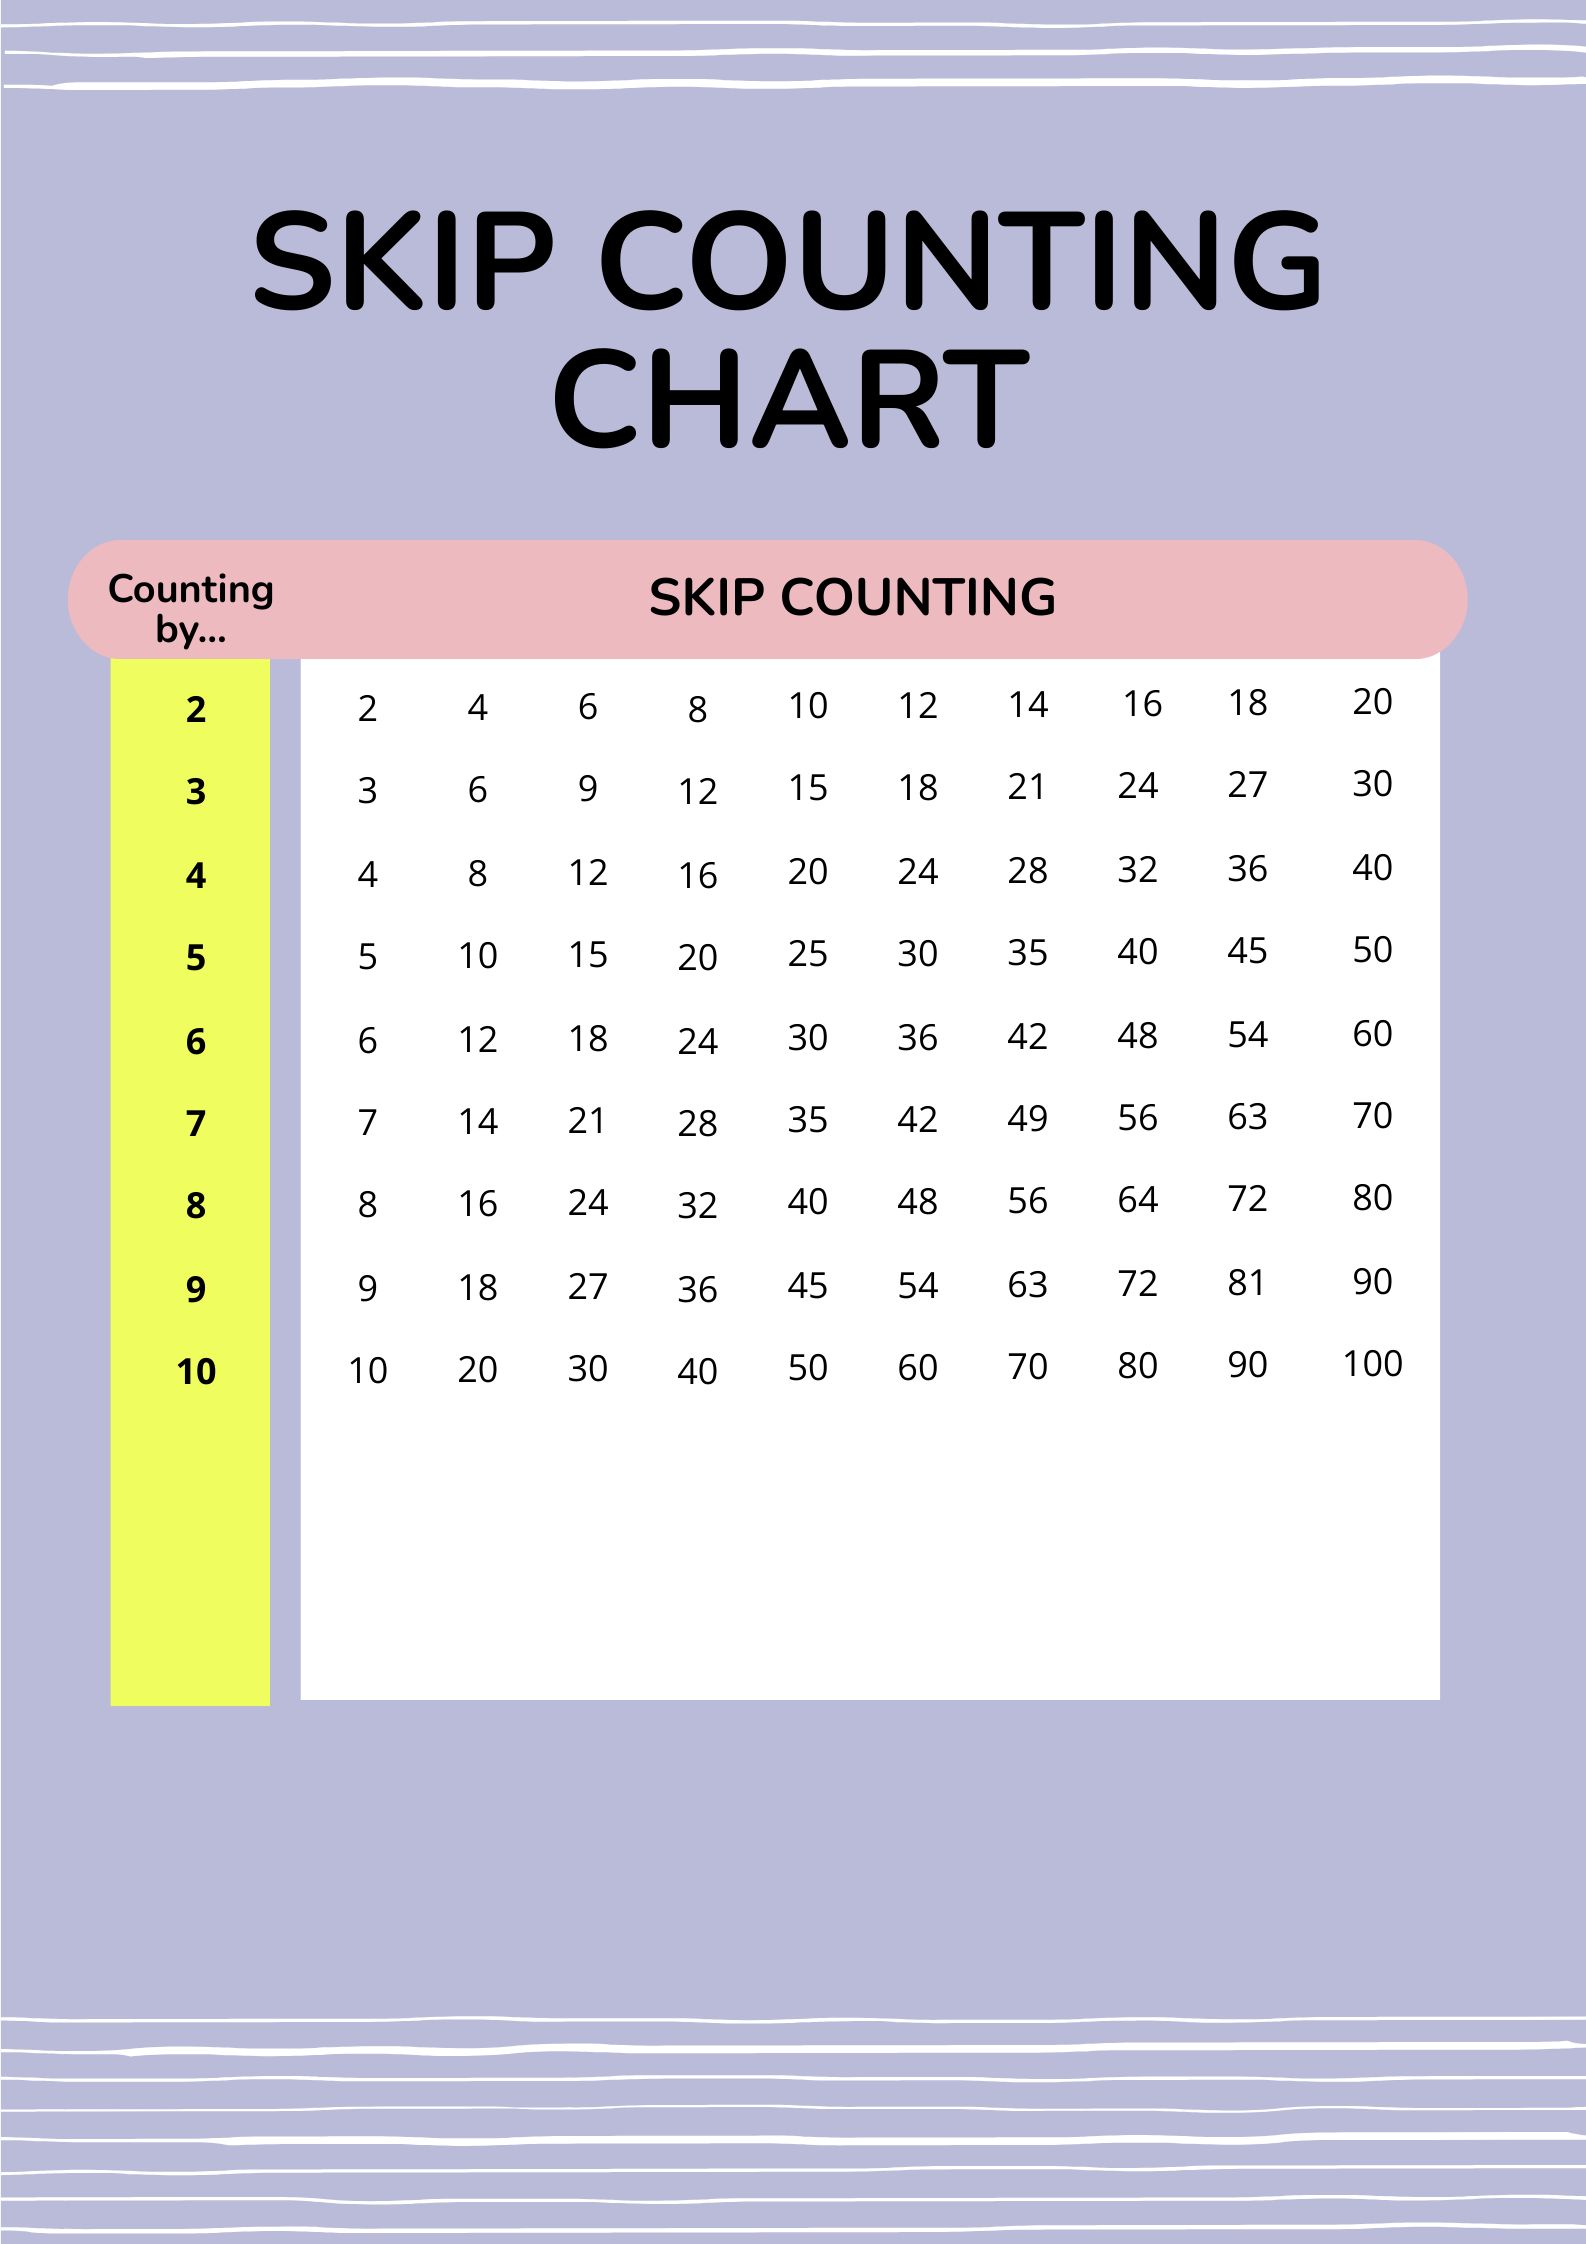 Skip Counting Chart in PDF, Illustrator